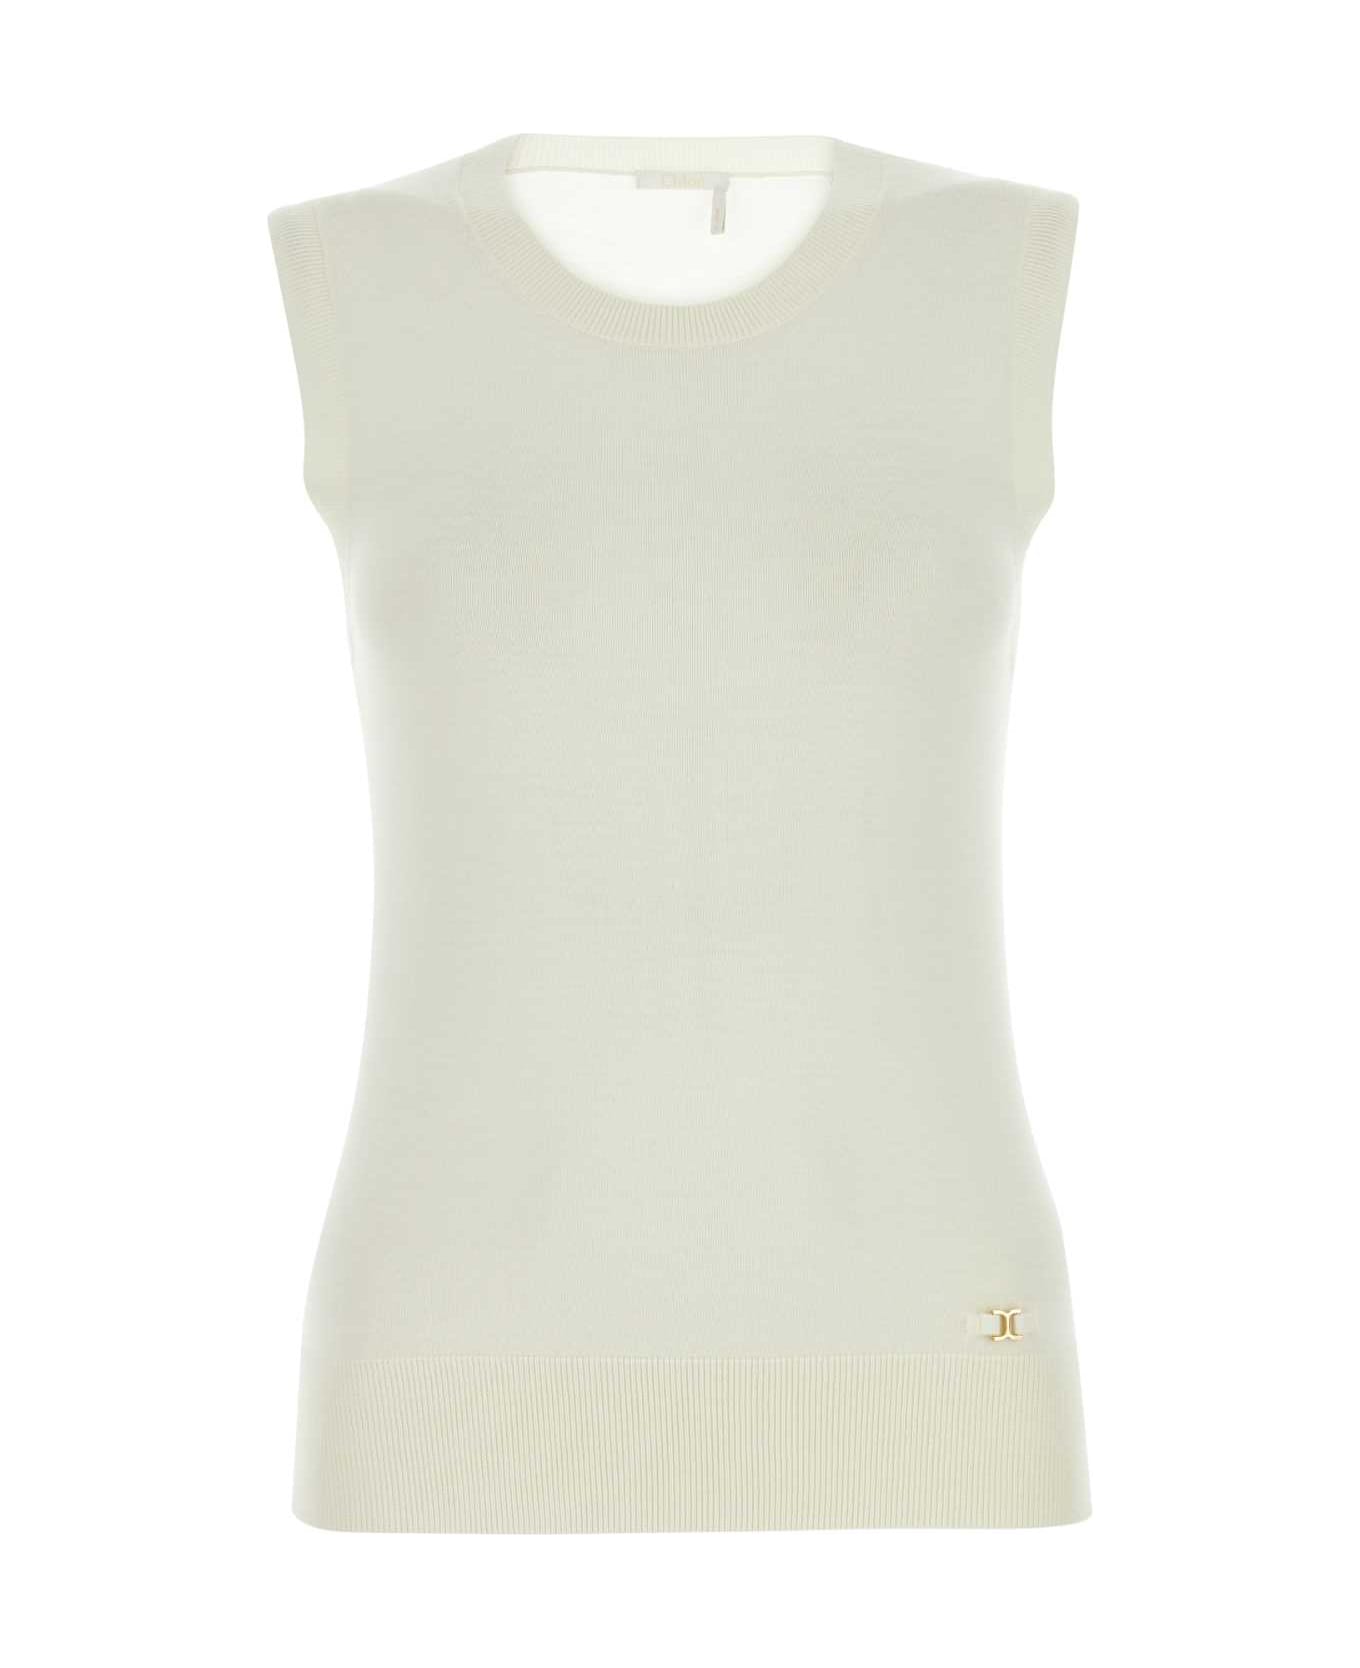 Chloé Knitted Top - ICONICMILK